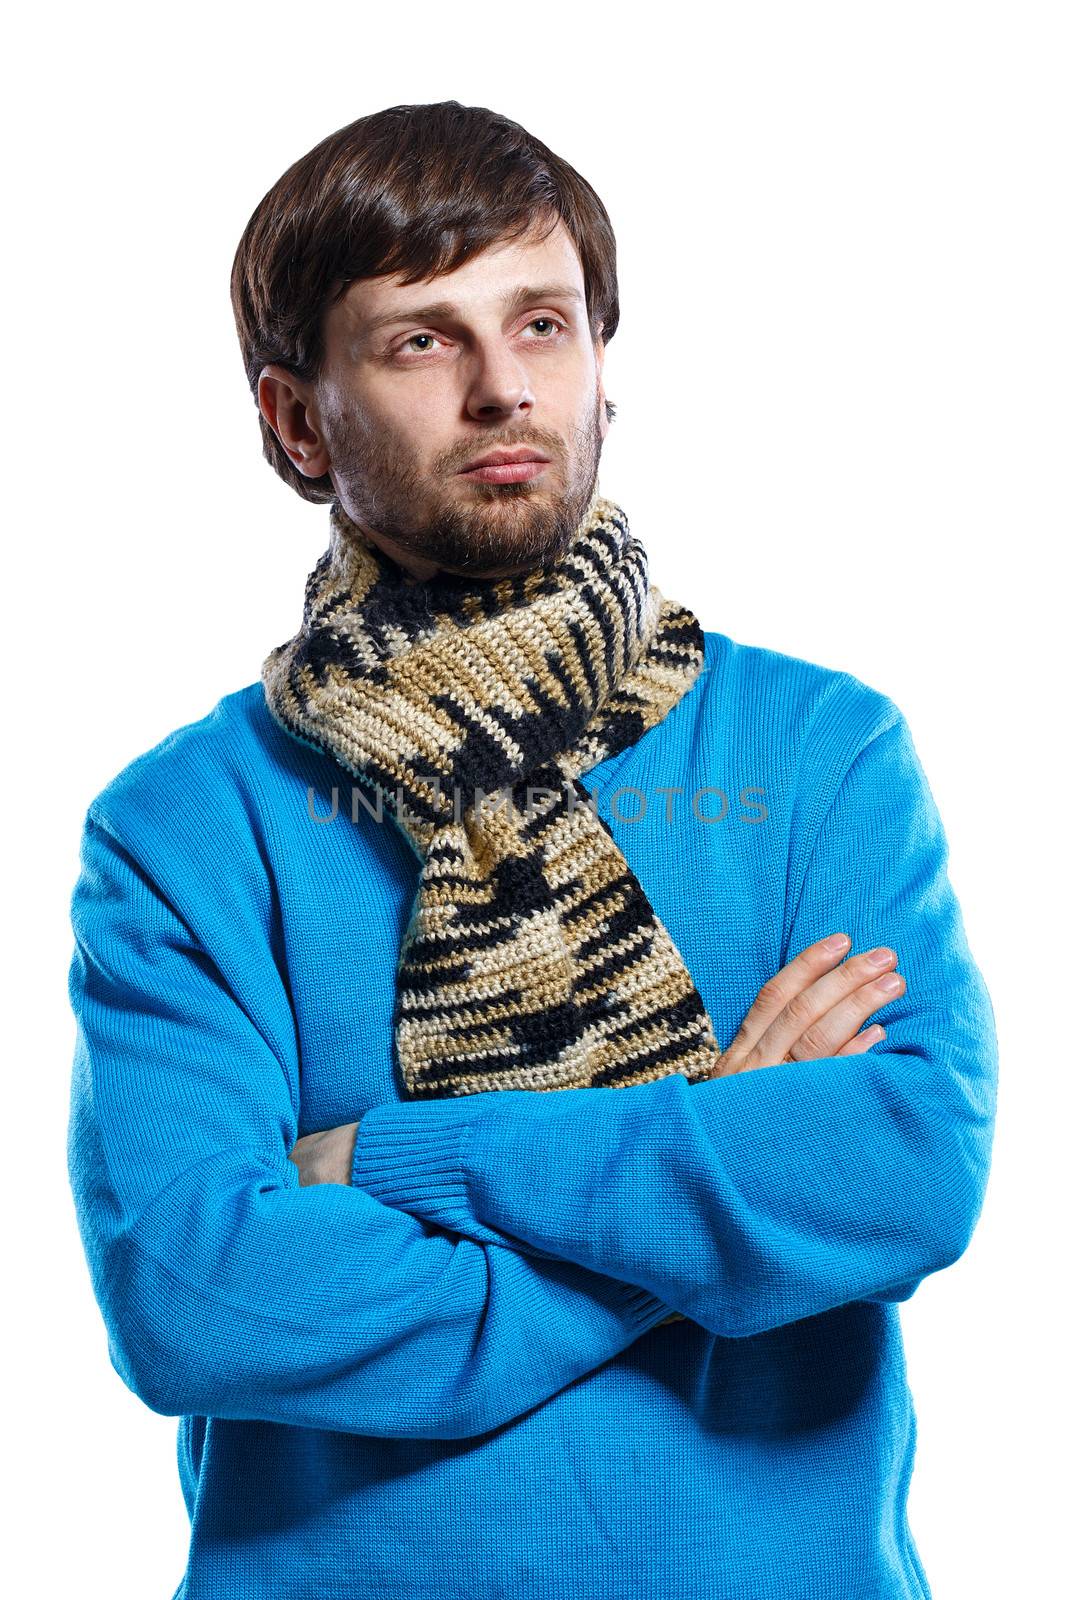 Young man wearing a scarf and a sweater folded his arms across his chest